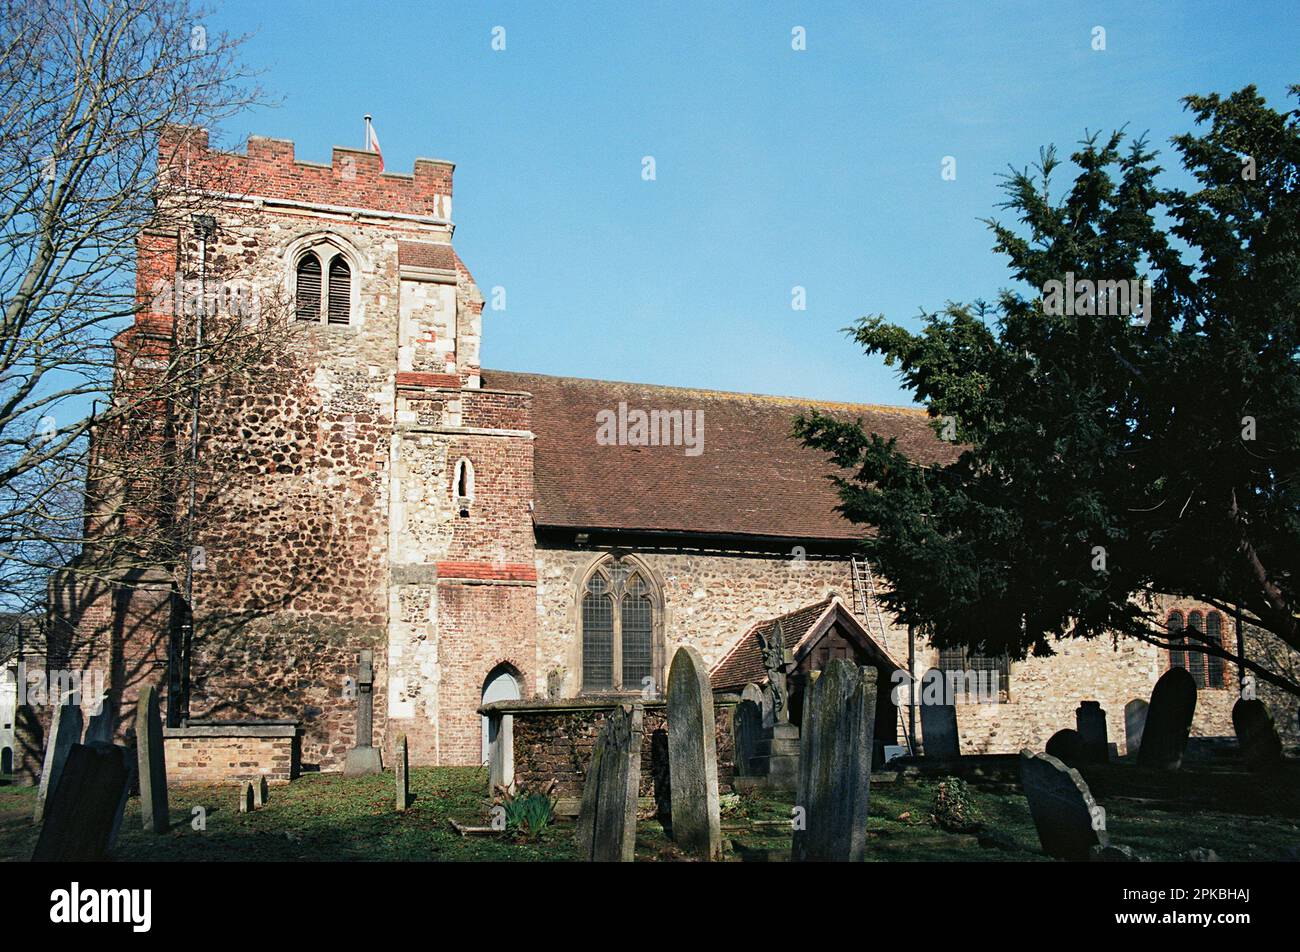 The exterior of the ancient church of St Mary Magdalene, East Ham, East London UK Stock Photo